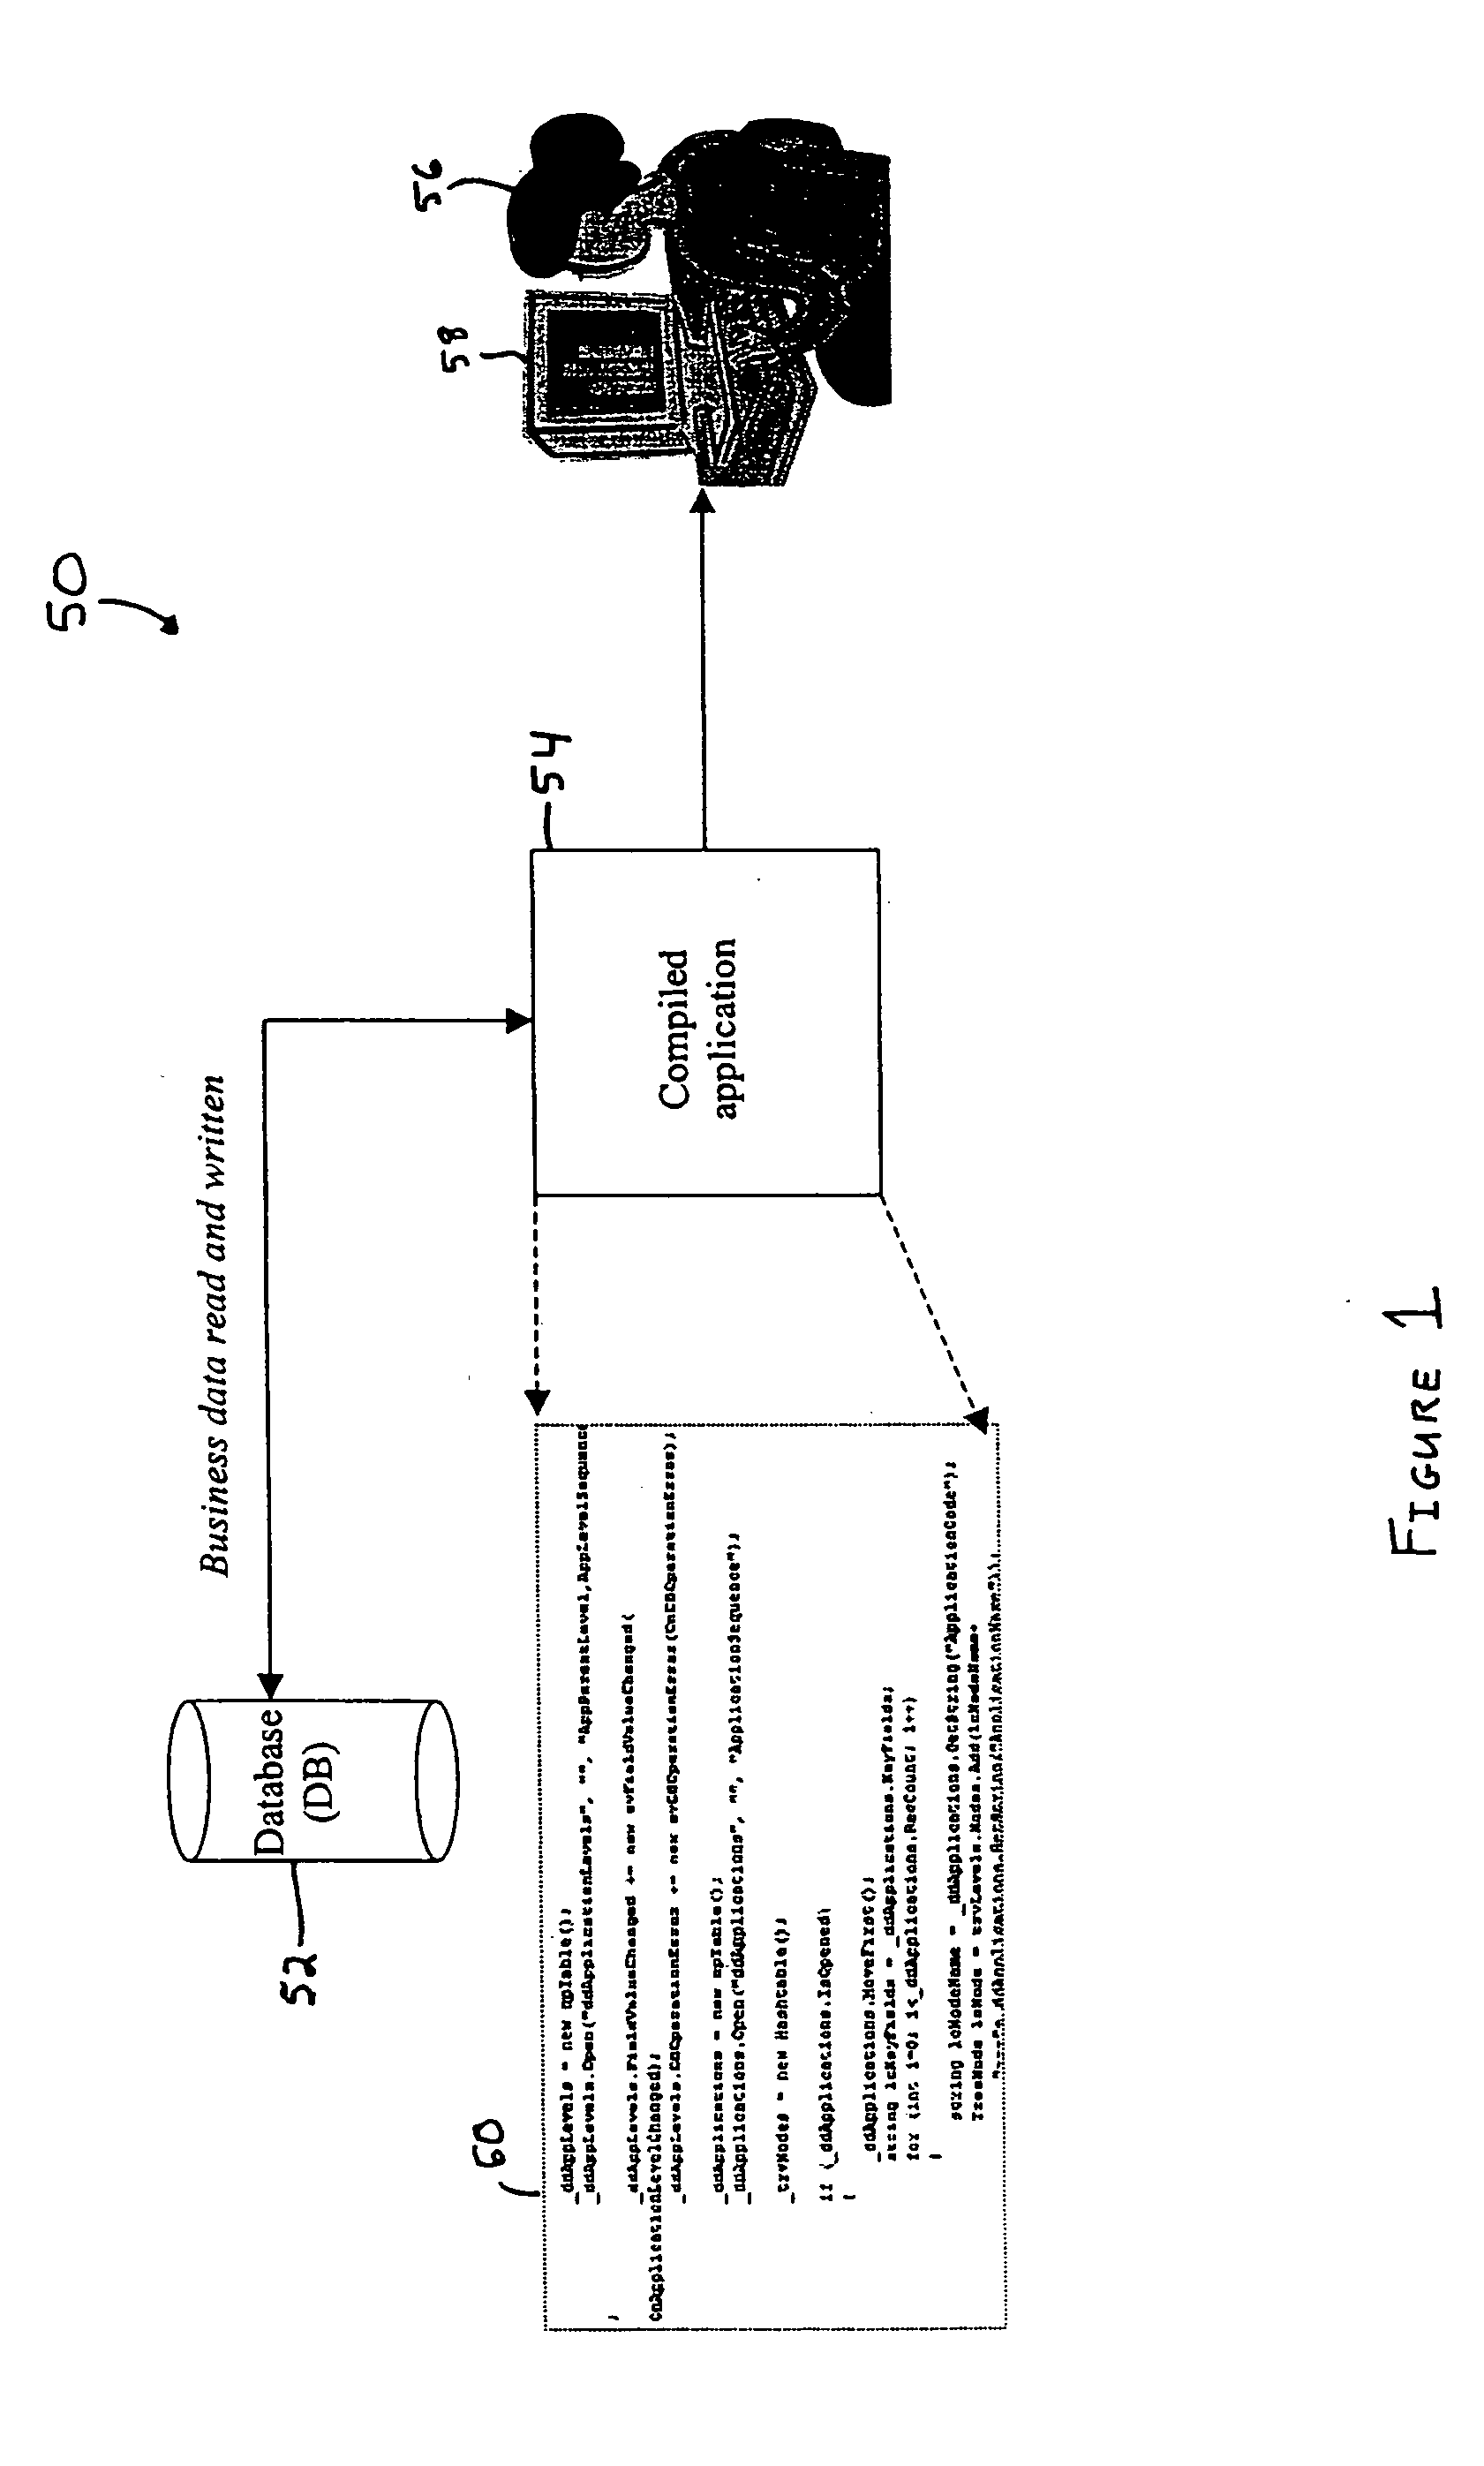 Business software application generation system and method